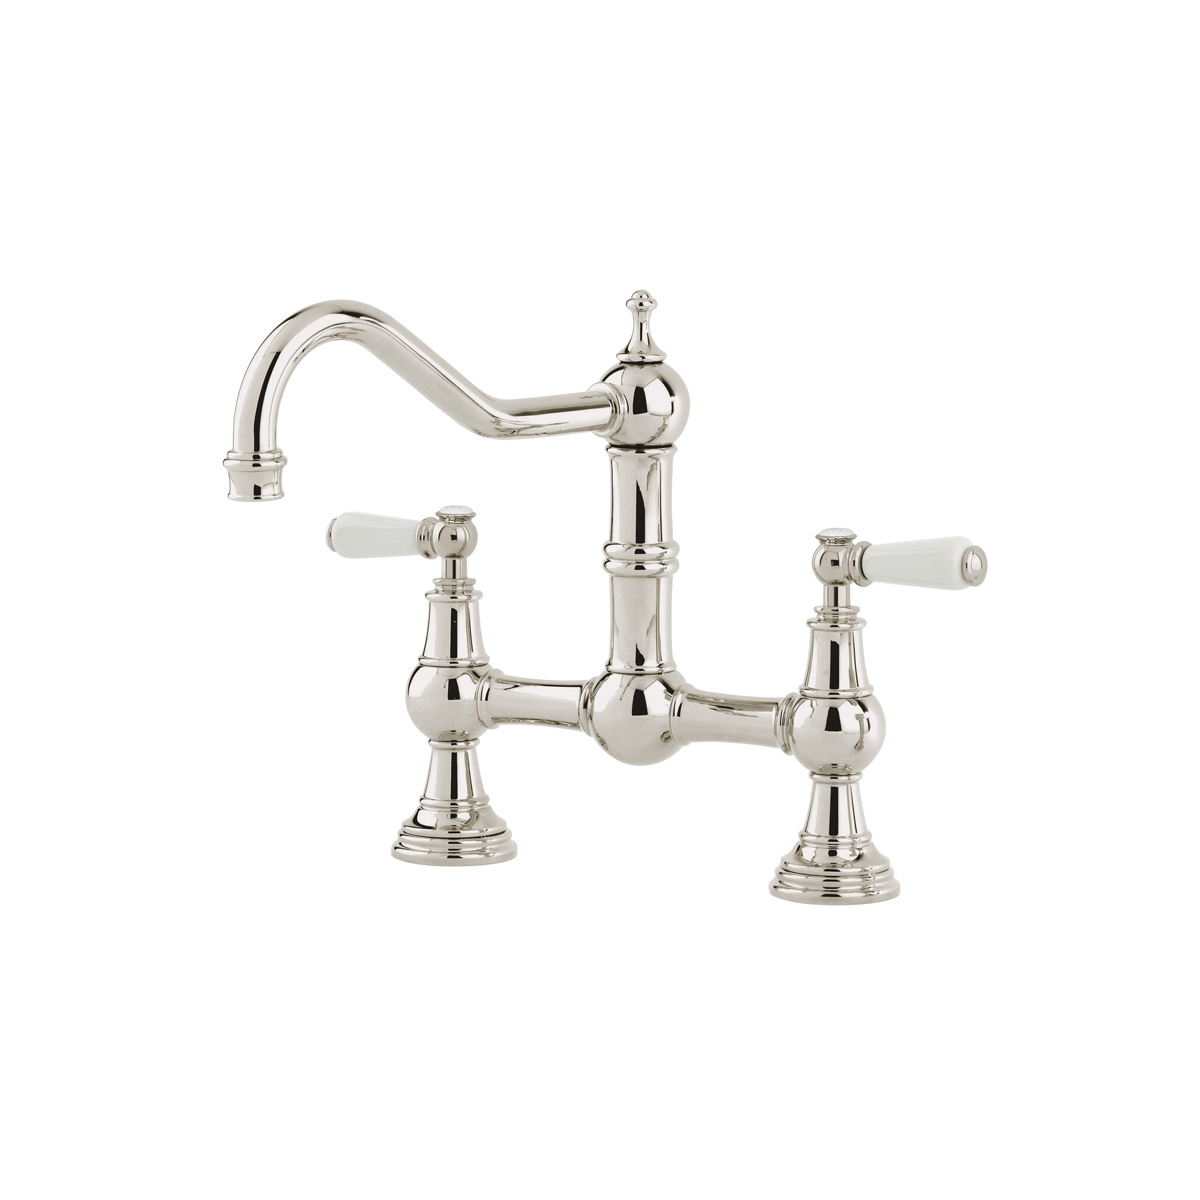 Shaws by Perrin & Rowe Hambleton French bridge mixer in Nickel. Provence style kitchen tap AUSH.4751. Distributed in Australia by Luxe by Design, Brisbane.